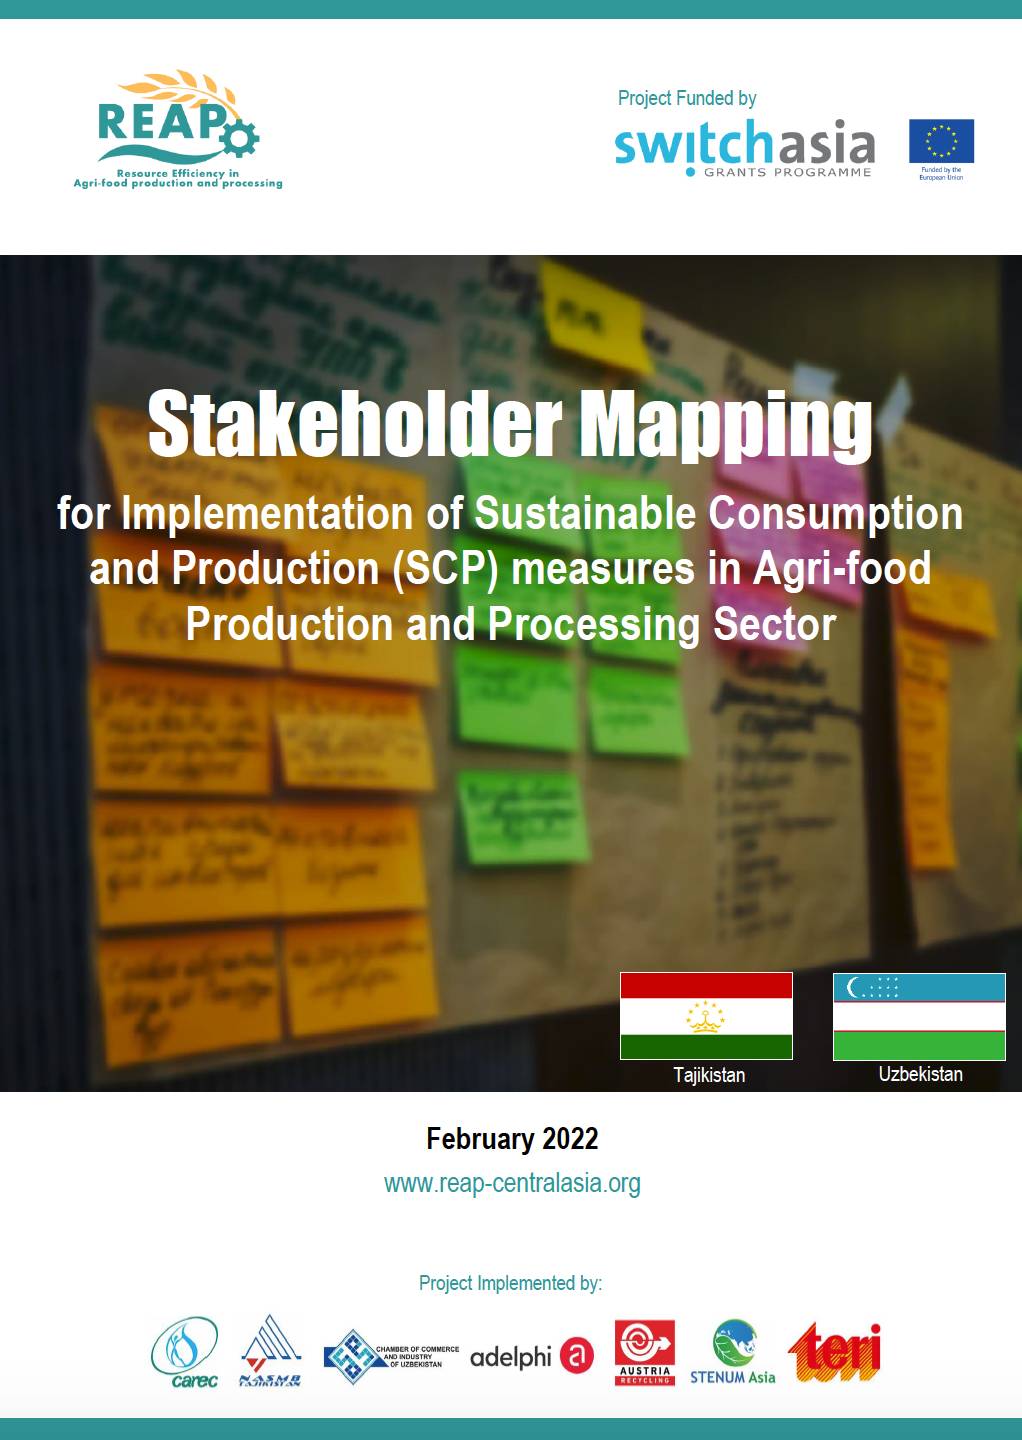 Stakeholder Mapping for the Implementation of SCP Measures in Agri-food Production and Processing Se...